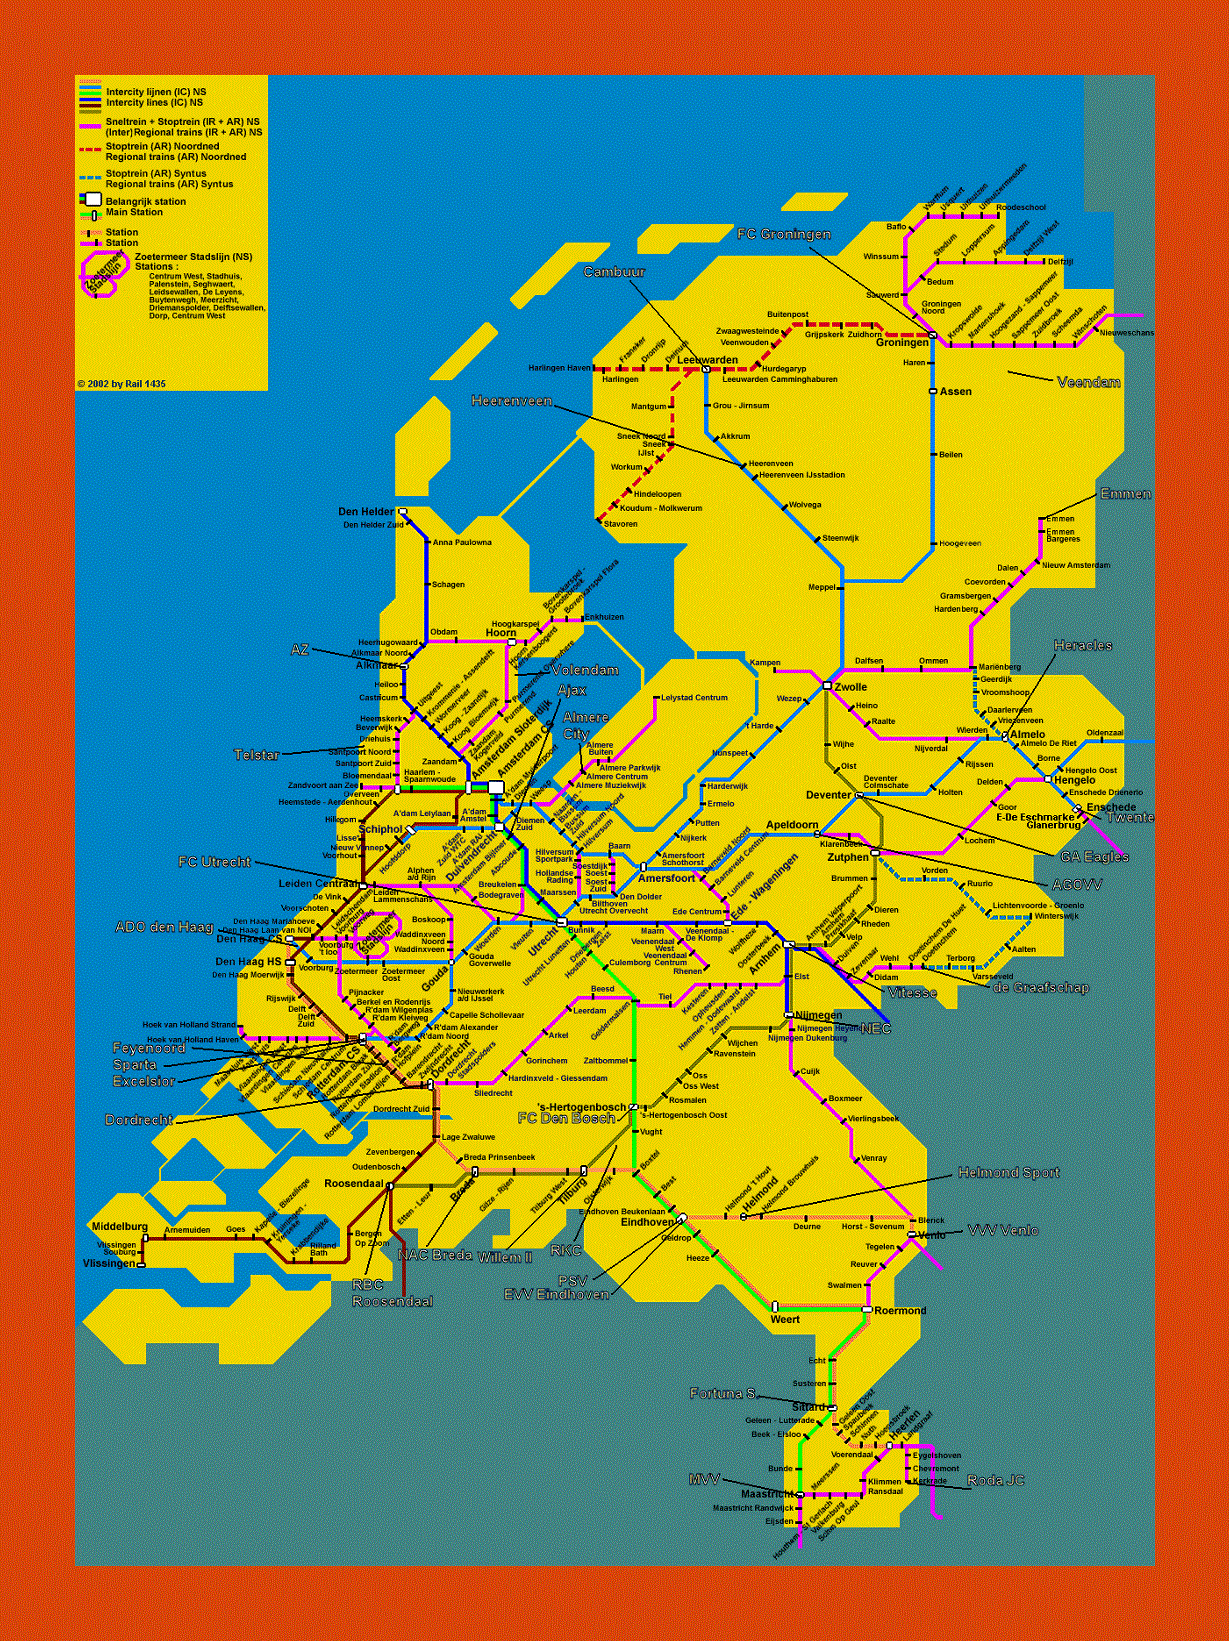 Train map of Netherlands (Holland)